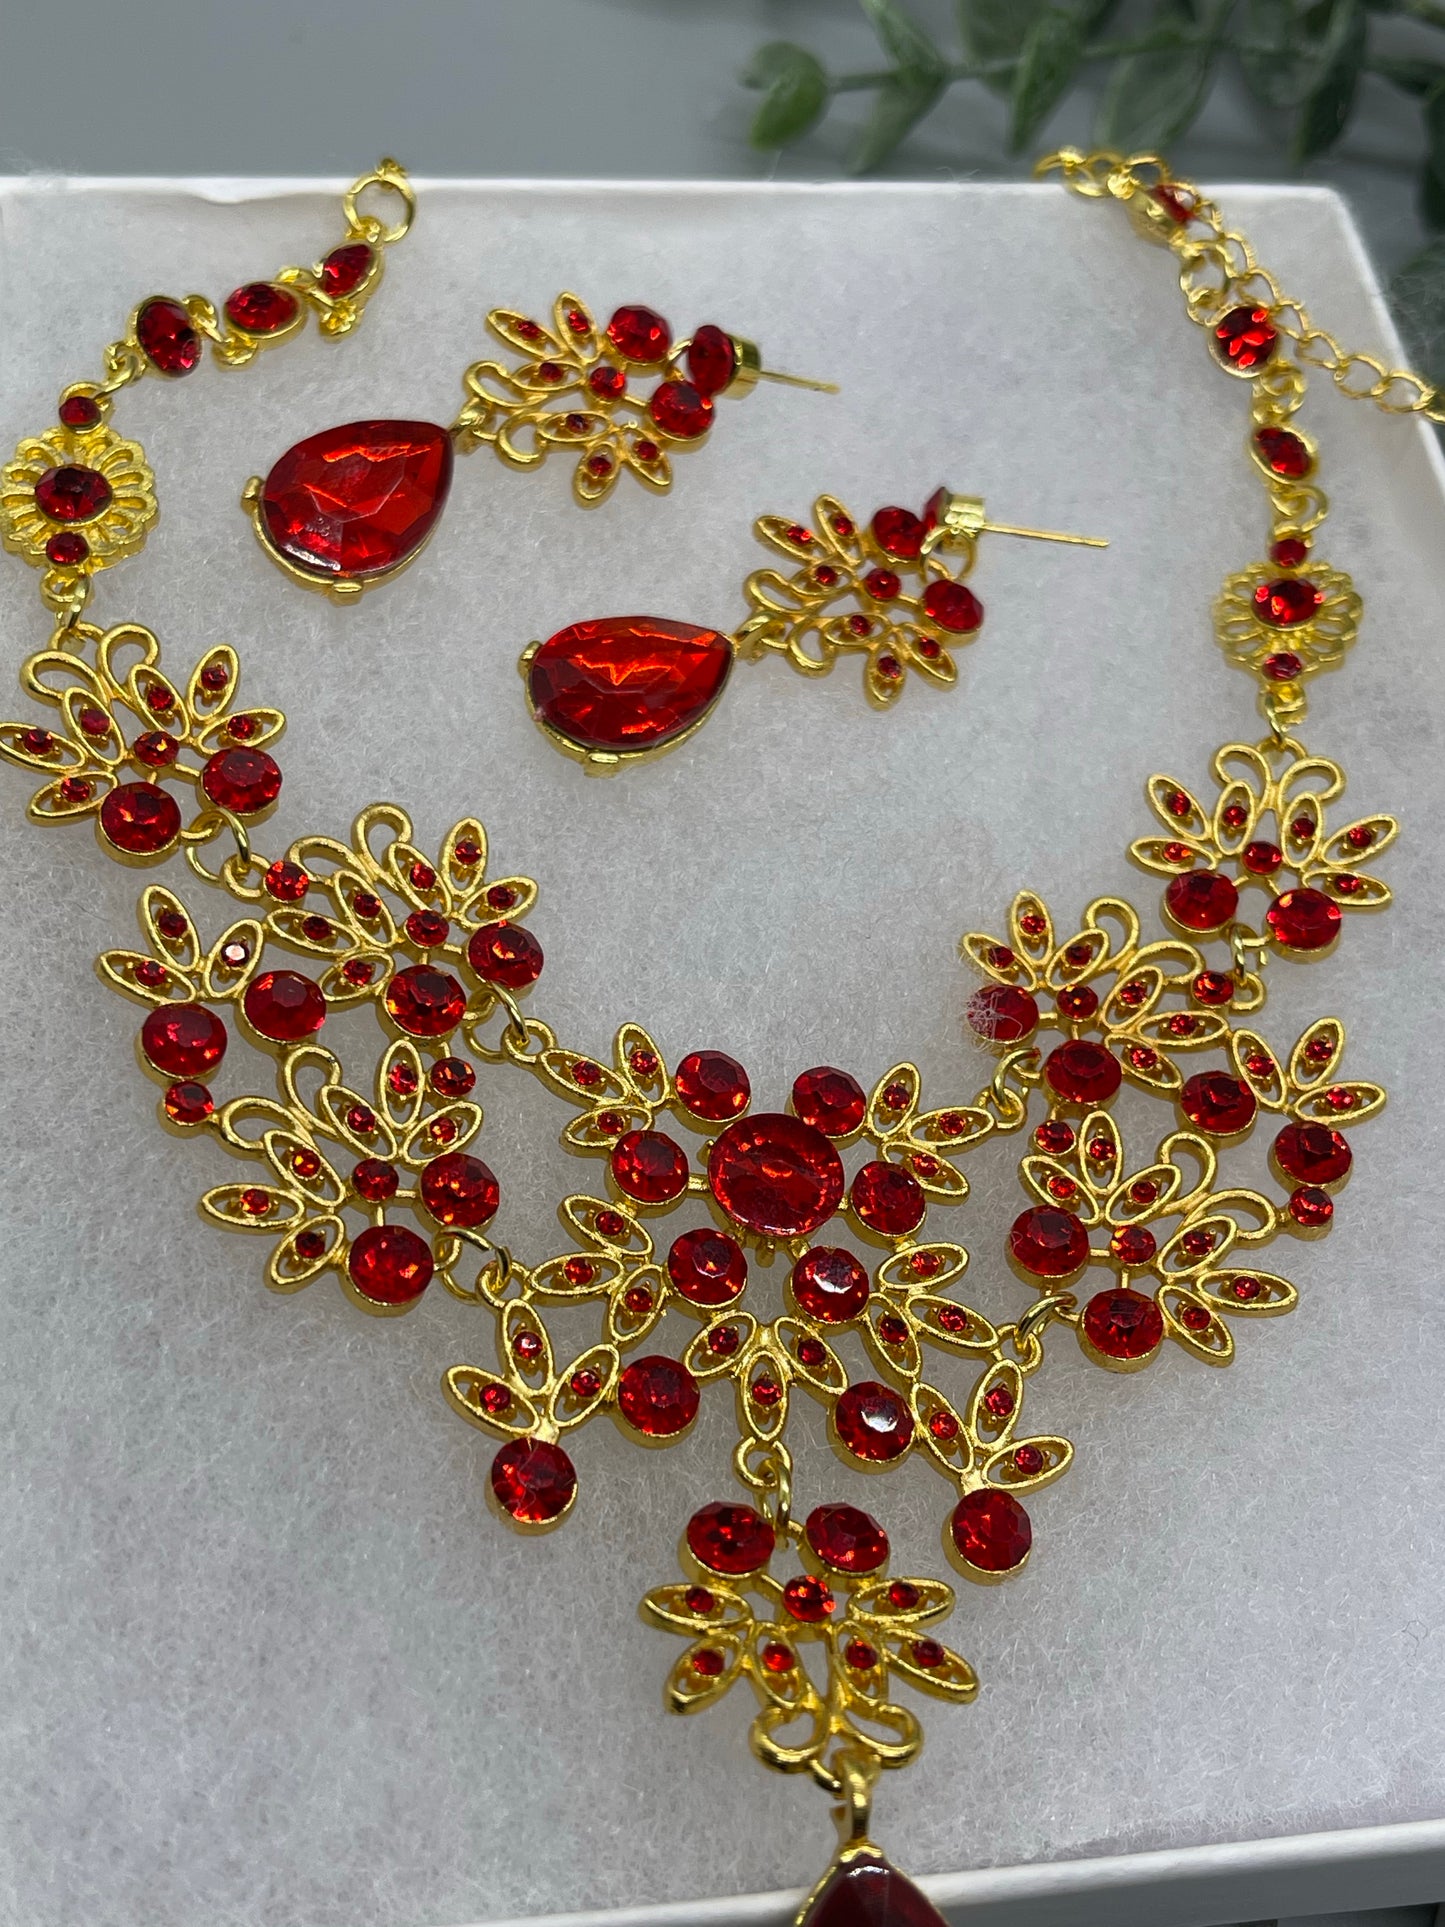 Red Gold rhinestone crystal necklace earrings set Rhinestone Jewelry Sets earring necklace wedding engagement formal party Prom sweet 16 sets